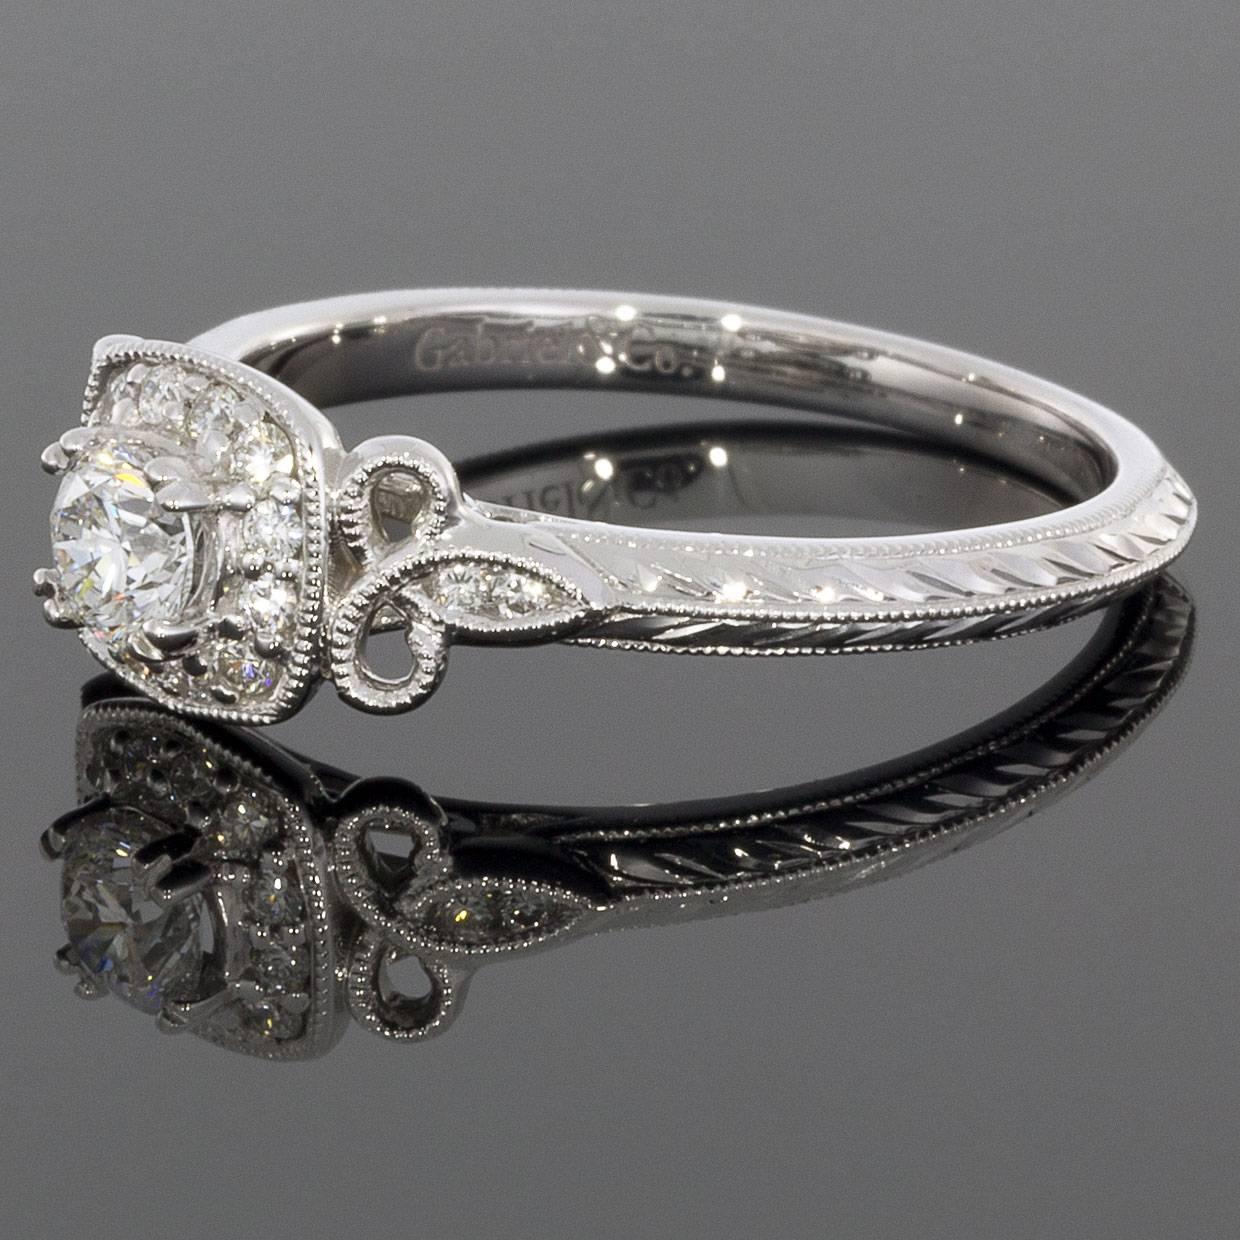 This vintage-inspired engagement ring is pure romance. A .35ctw diamond halo framed by floral-inspired accents embraces the .23ct round cut center diamond. Milgrain details embellish the 14k white gold knife edge band.

Details:
14K White